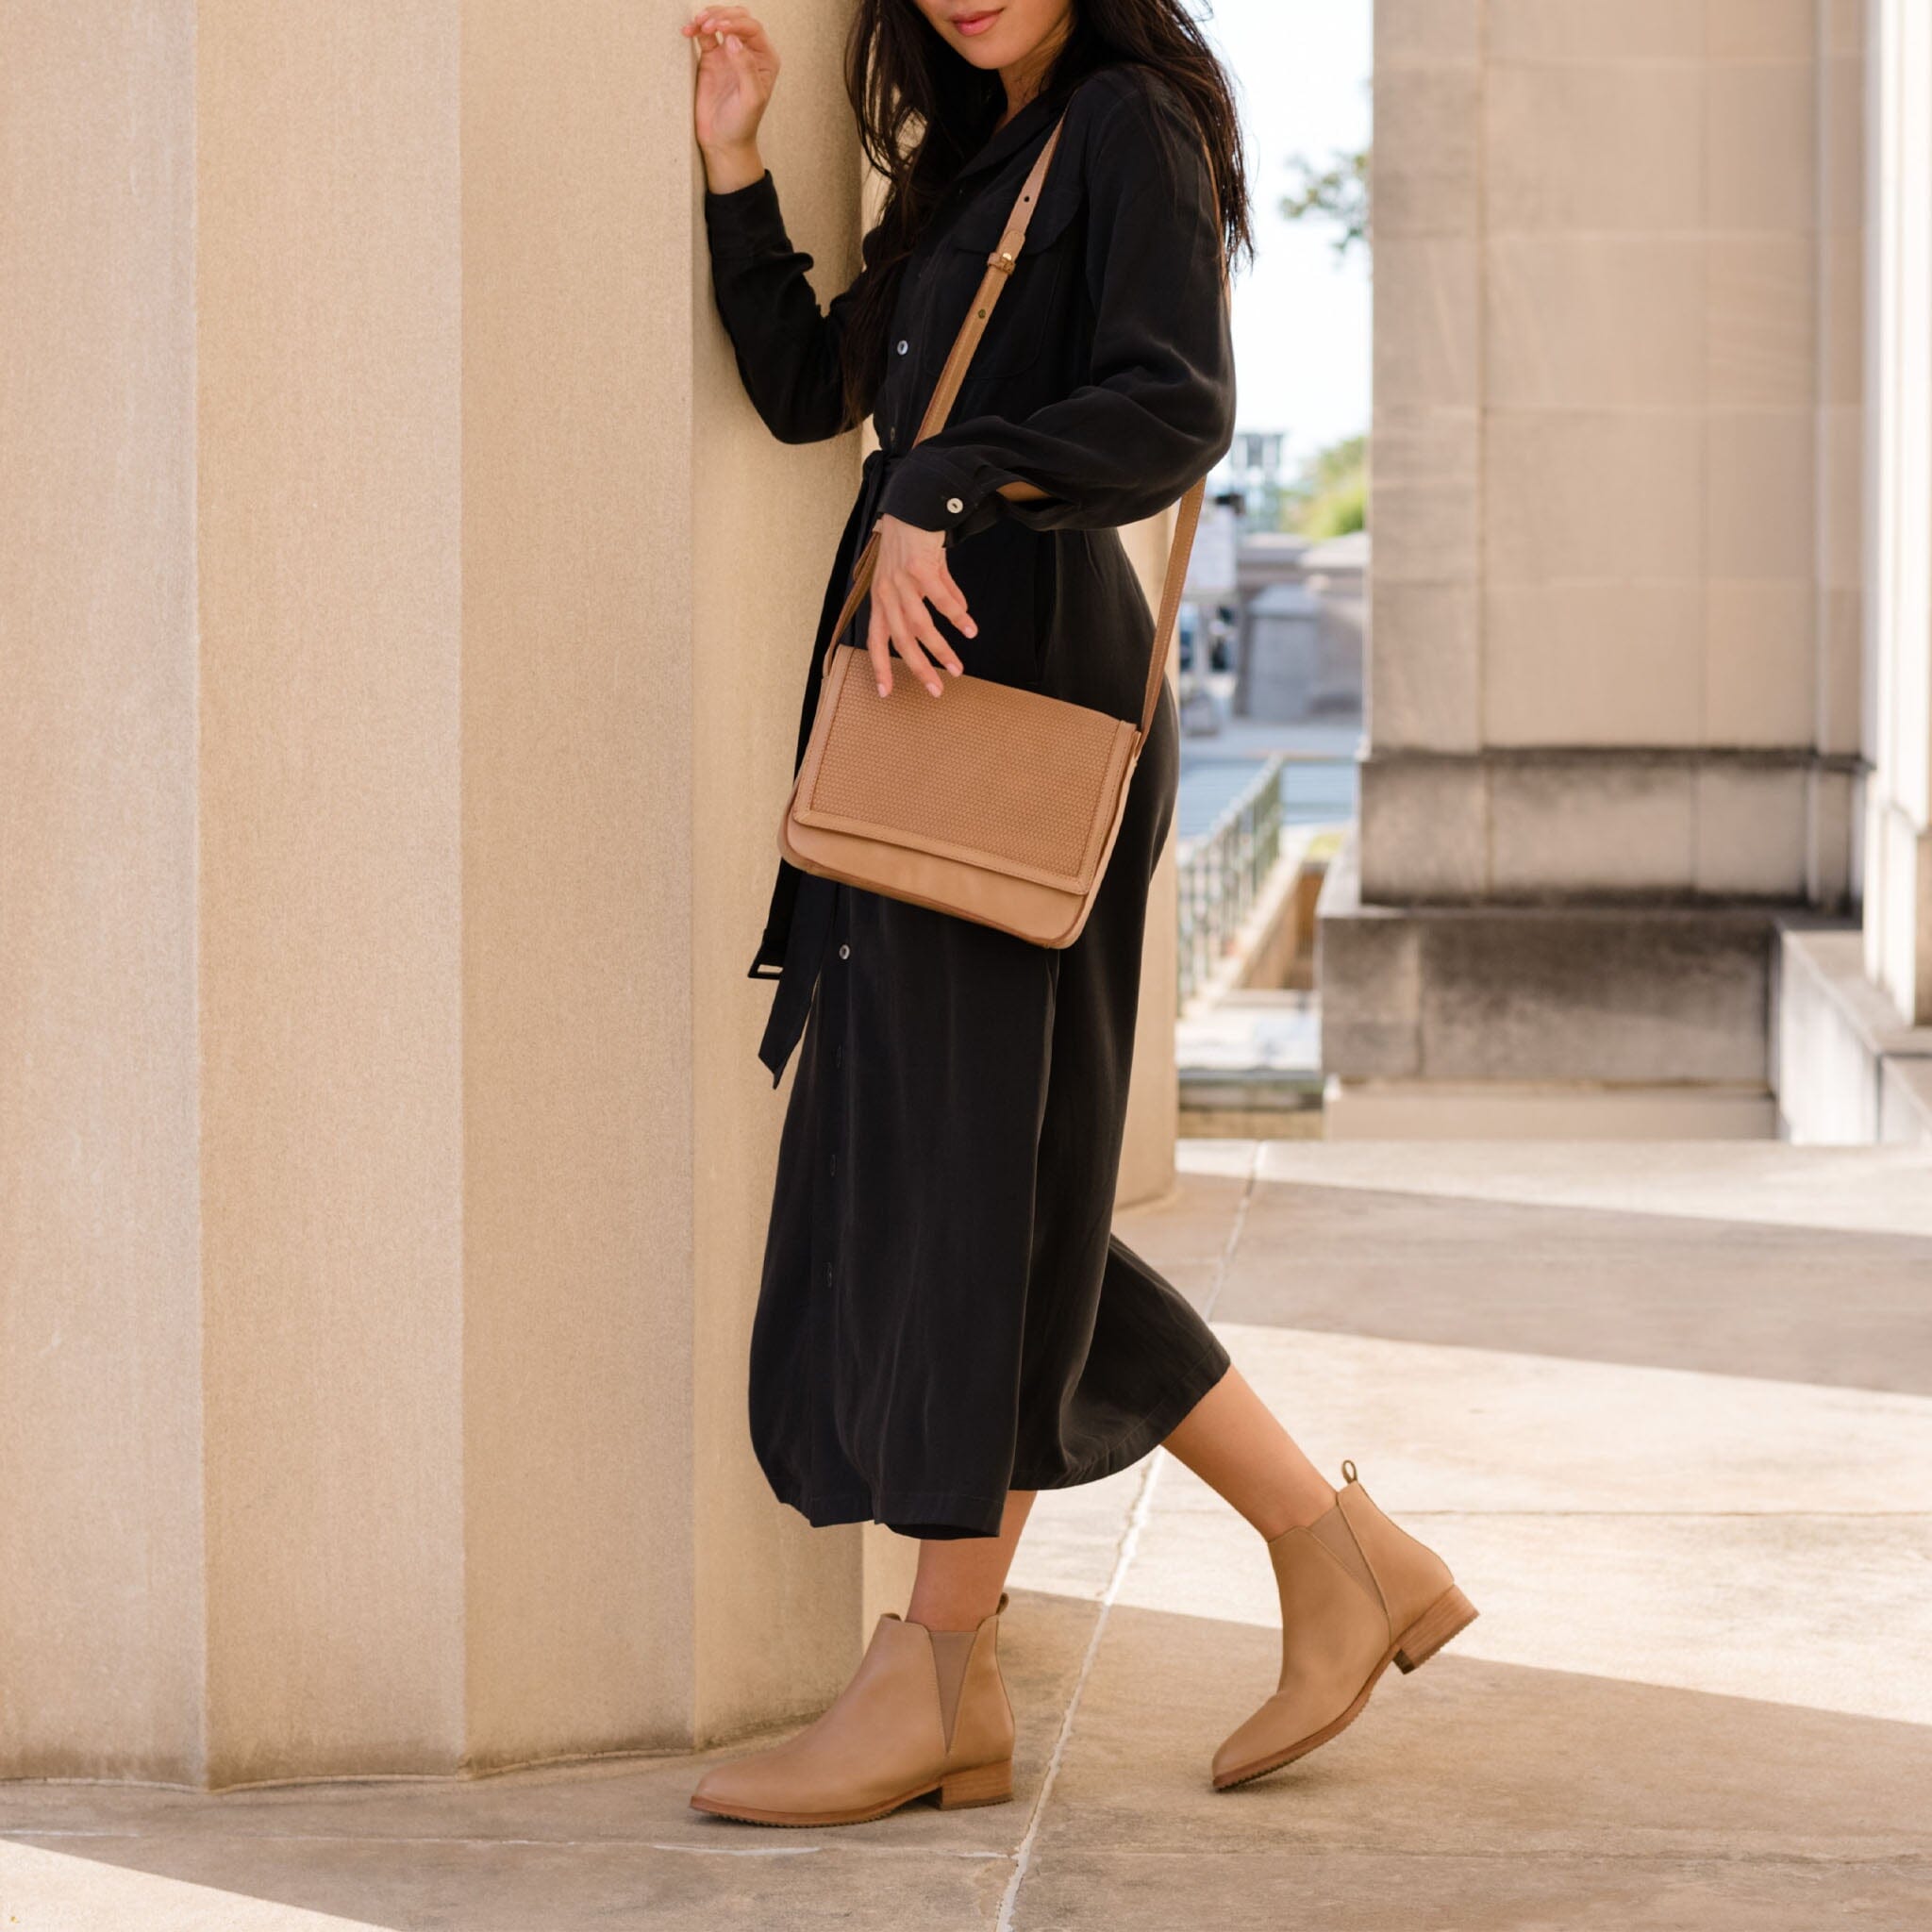 How To Style Chelsea Boots: 10+ Outfit Ideas